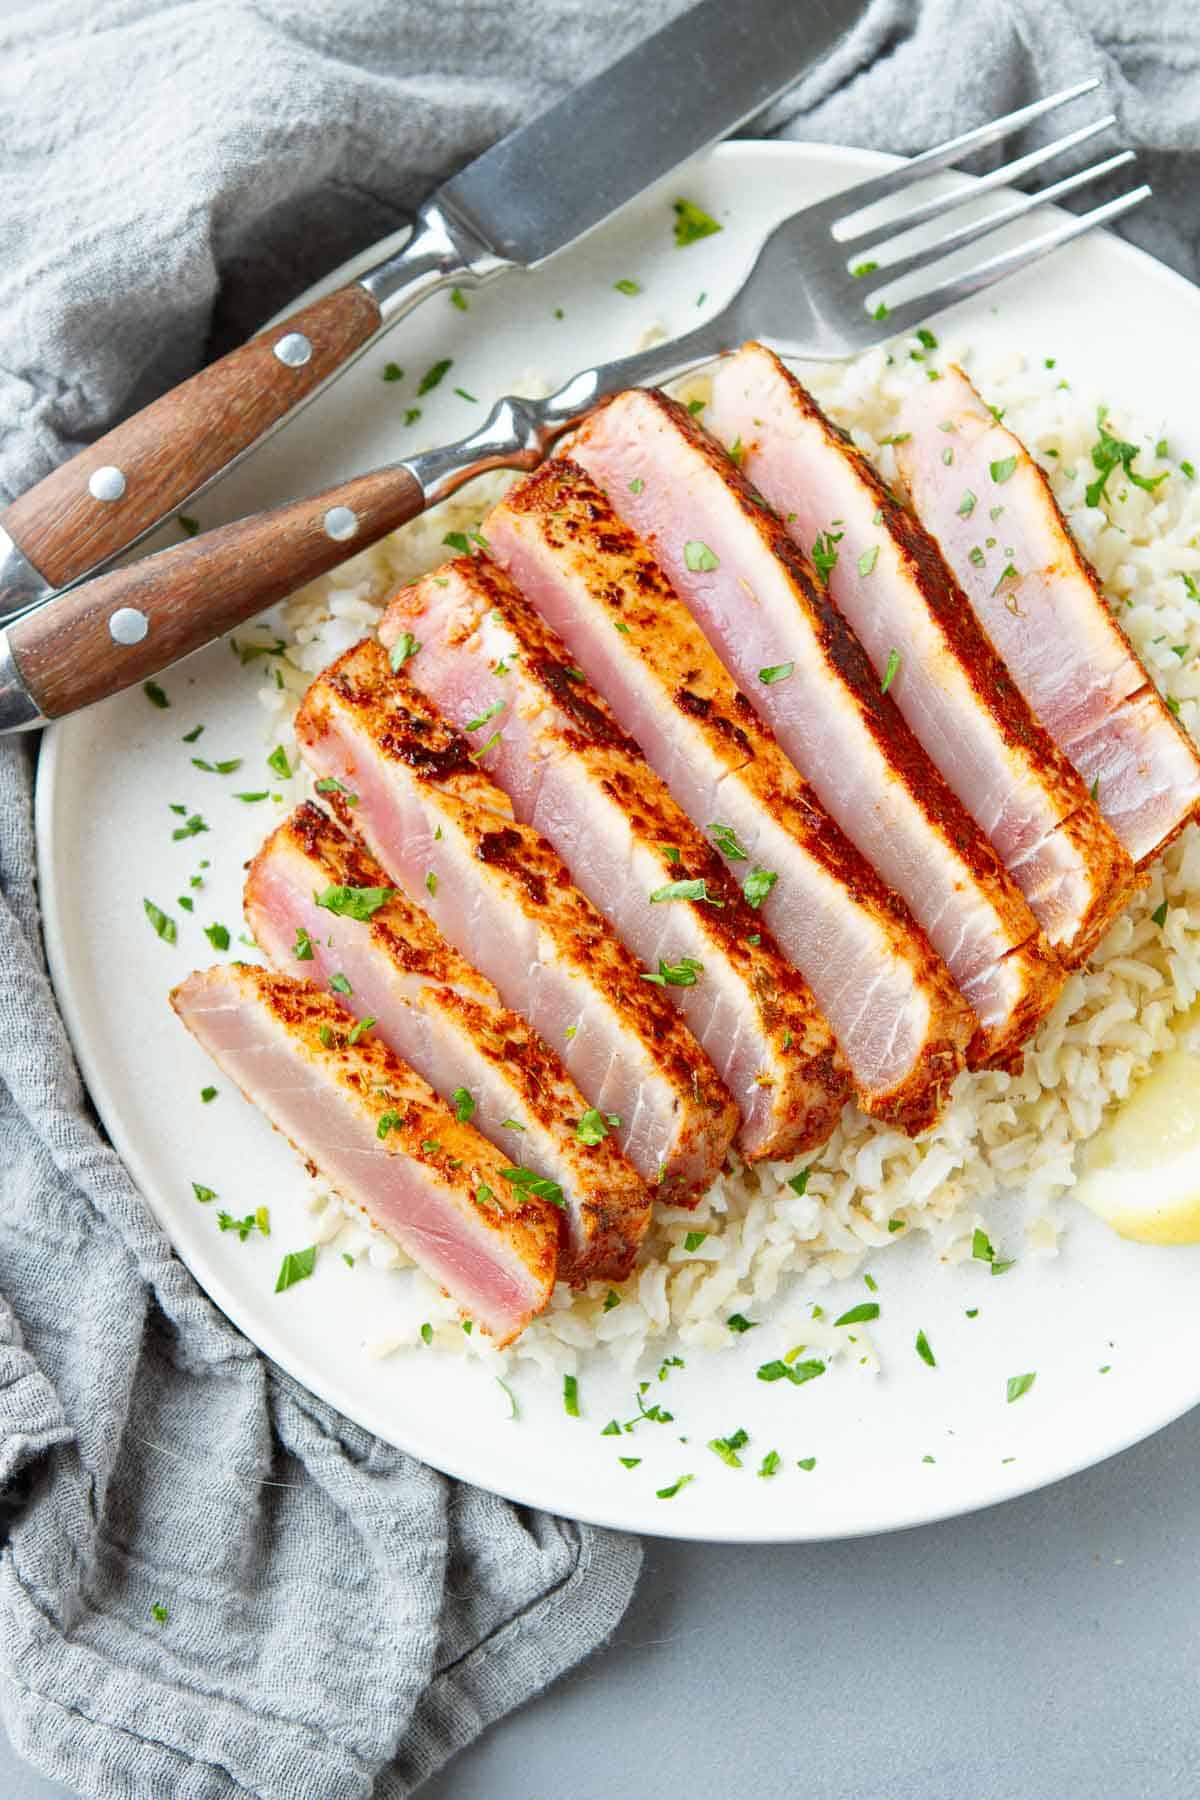 Blackened tuna is an impressive dish that can be made in just a few minutes. The end result is a mouthwatering spiced crust and perfectly cooked, rare tuna in no time.